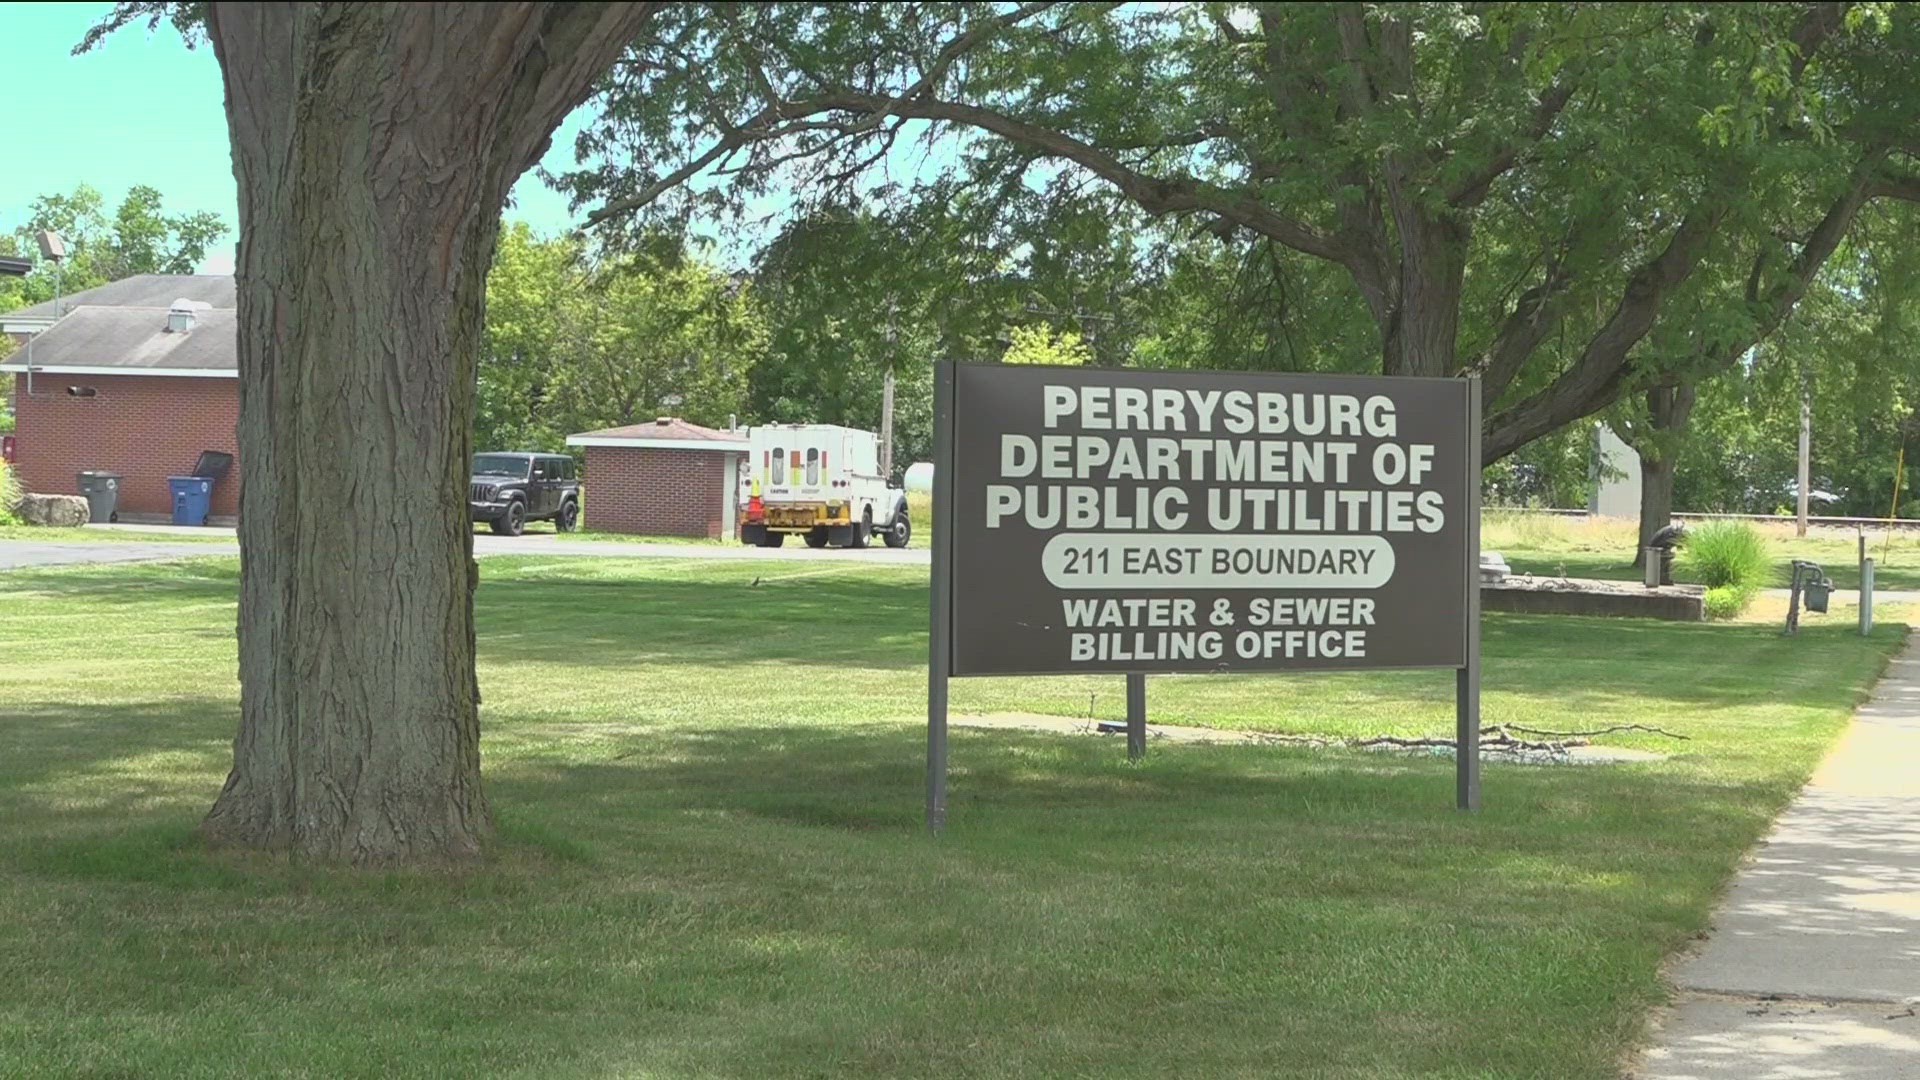 Homeowners in Perrysburg can expect to see higher rates on their water and sewer bills next month, which the city said is needed for the public utilities budget.